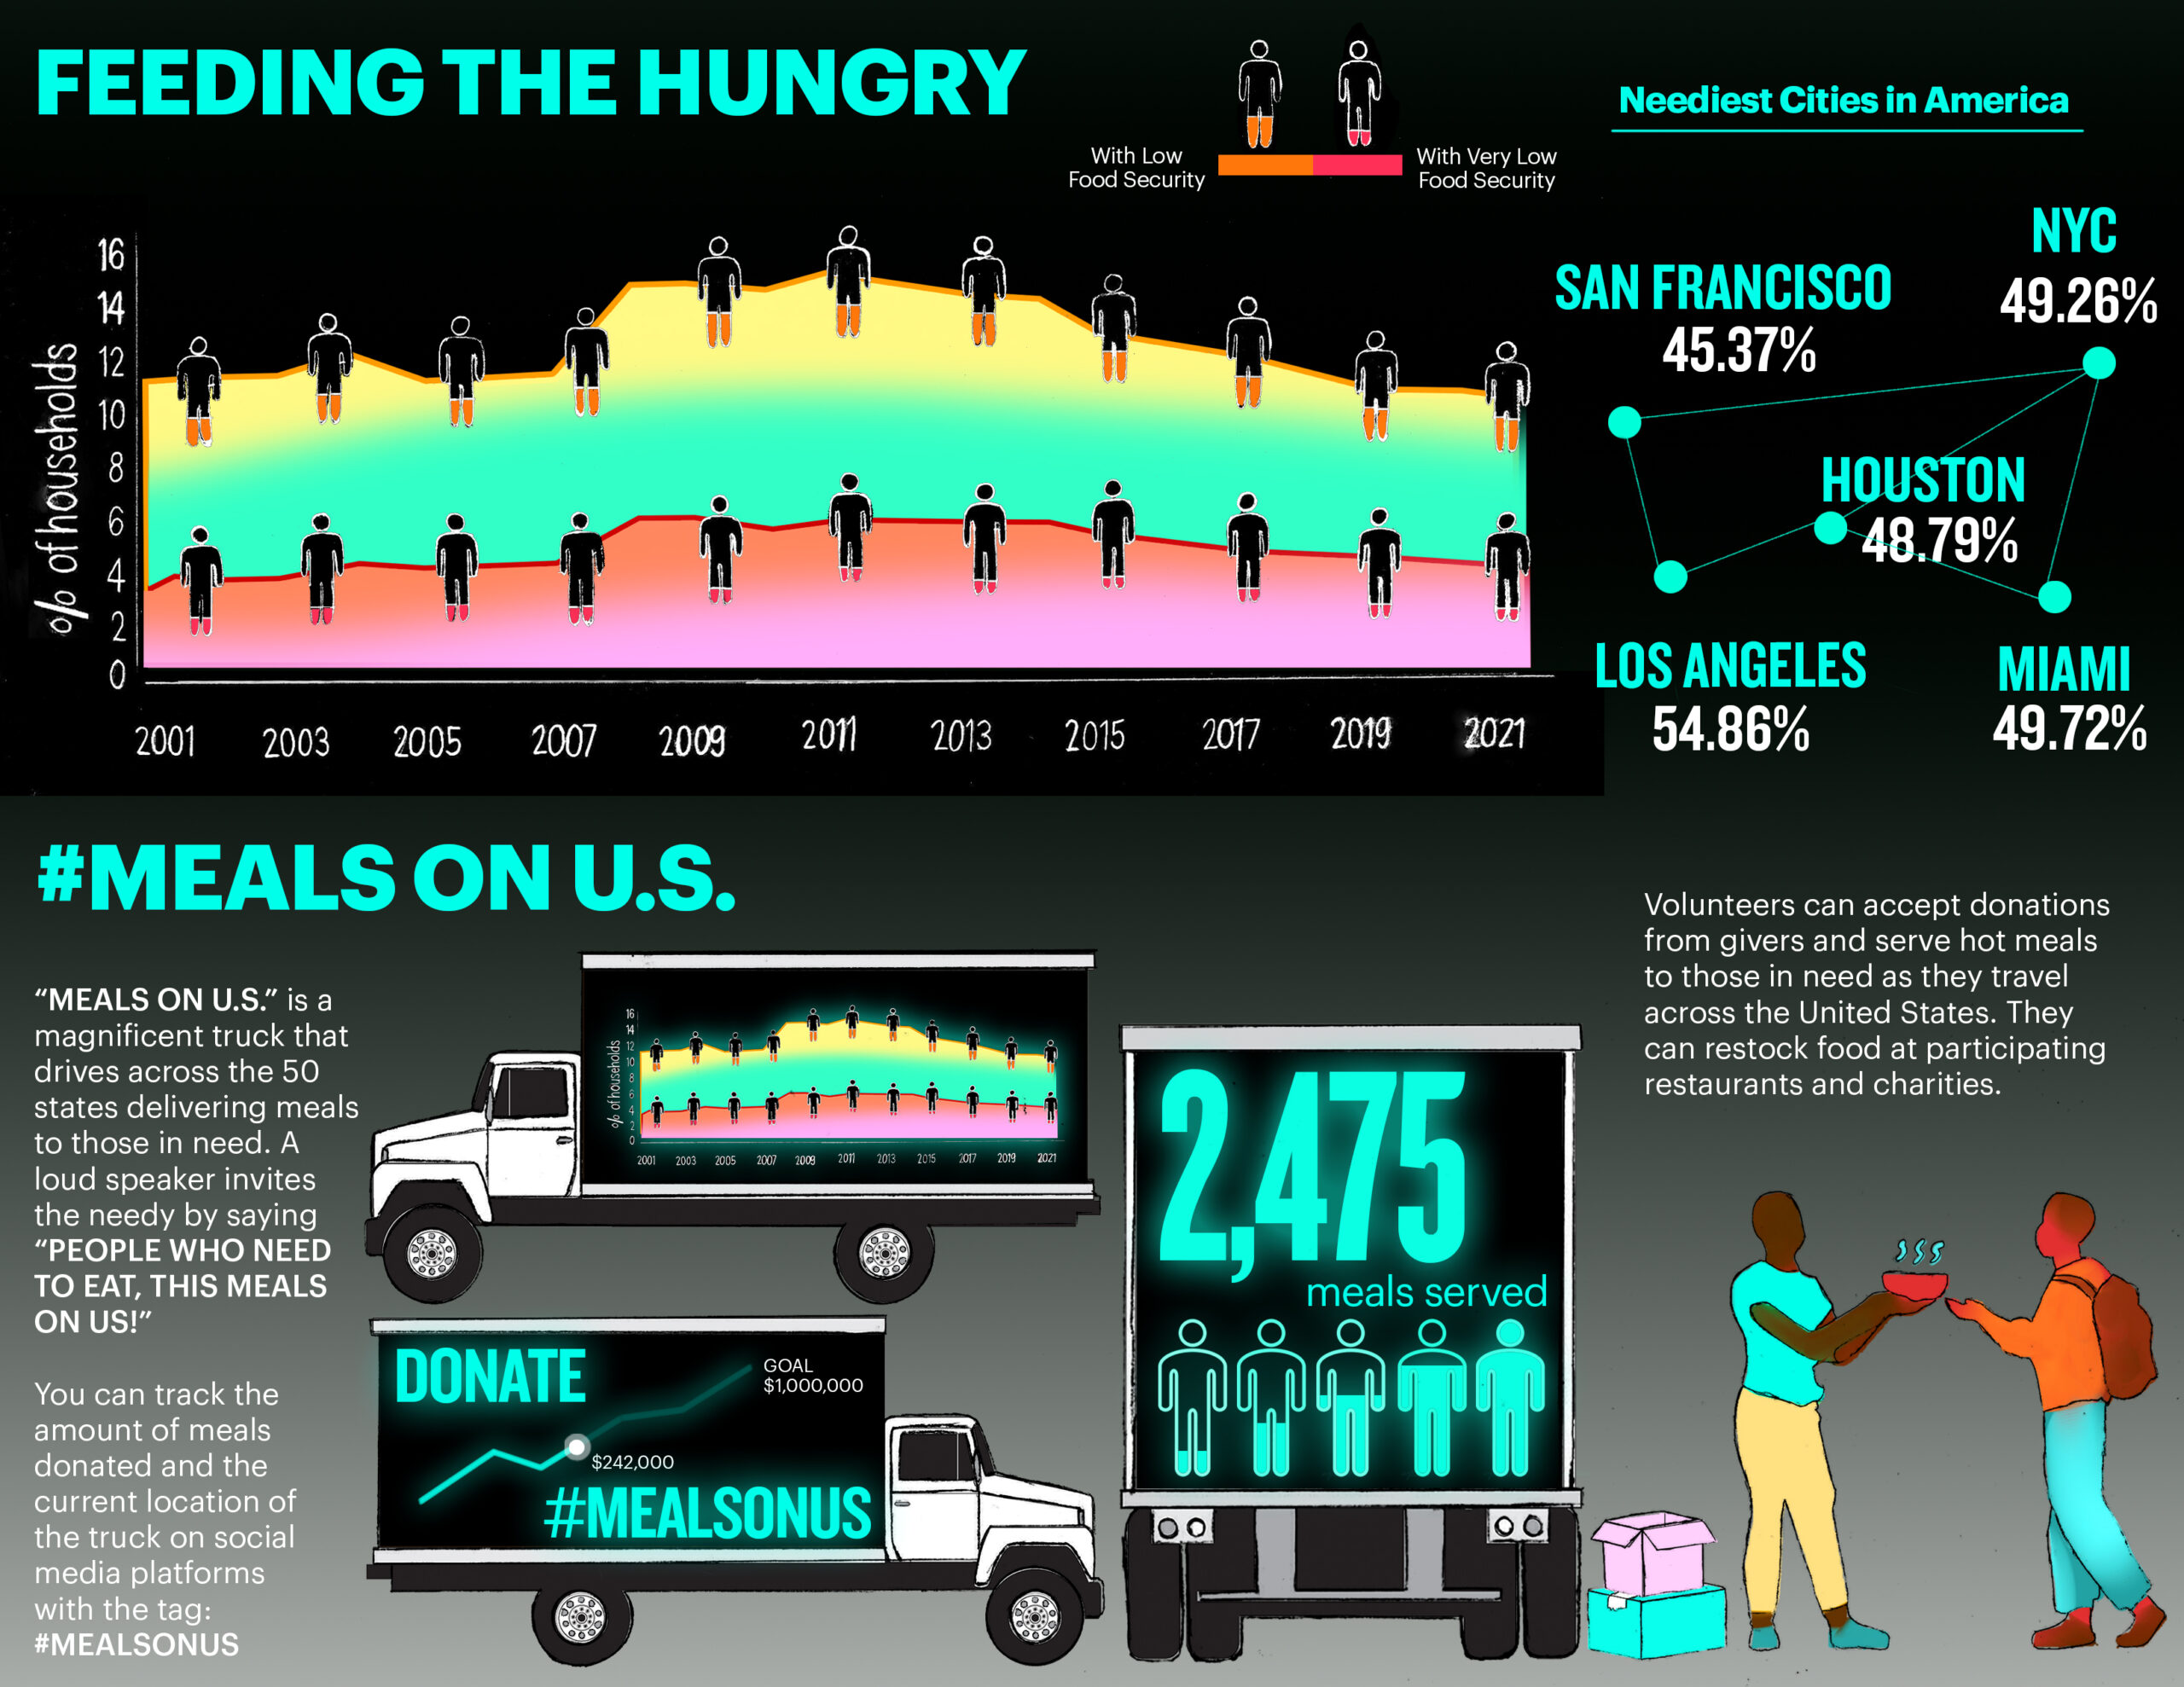 My data shows the percentage of households with low food security in the United States. This can help us understand the needs of others and provide a way to donate through a trackable food truck. I want to impact donors and recipients by providing awareness and methods to help. My main data is from a USDA Economic Research Service report on household food security. I also researched cities with the highest need to highlight the most critical areas in our country. My main graph shows the percentage of households with low and very low food security in the past 10 years. The figures representing the points on the chart are shown as orange and red empty human symbols indicating their critical condition. My design is displayed as LED screens on a traveling donation truck. The screens also show how many meals are delivered through my campaign called #MealsonUS. Users can track this information and the location of the truck through social media updates. This will encourage involvement in donating across the country.